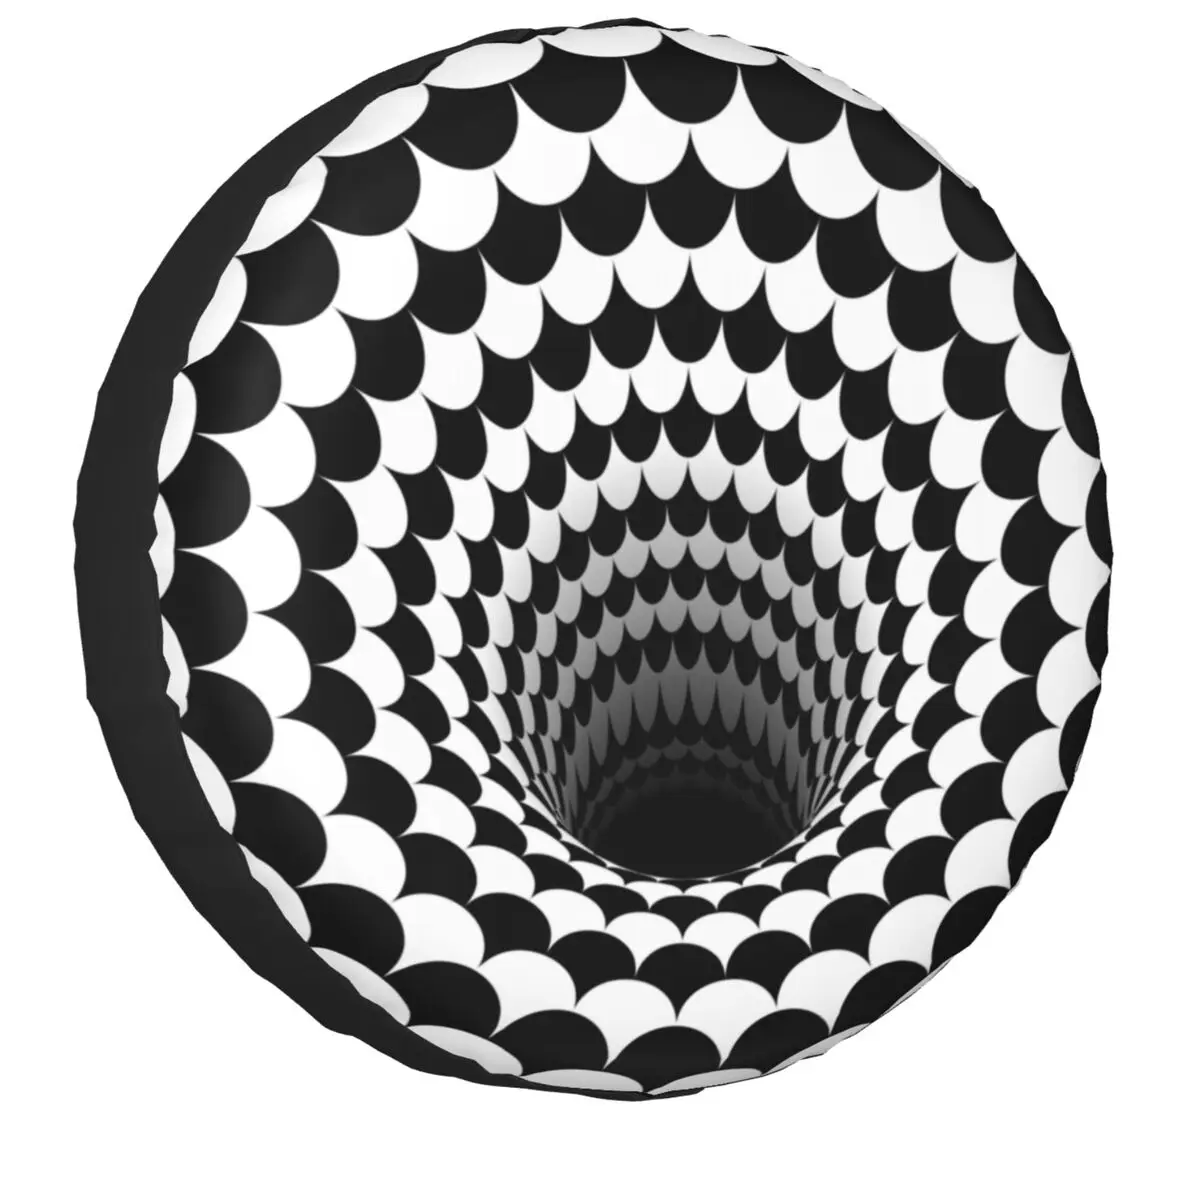 

Optical Illusion Black Hole Scales Spare Tire Cover Case for Pajero Geometry Black And White Car Wheel Protectors Accessories